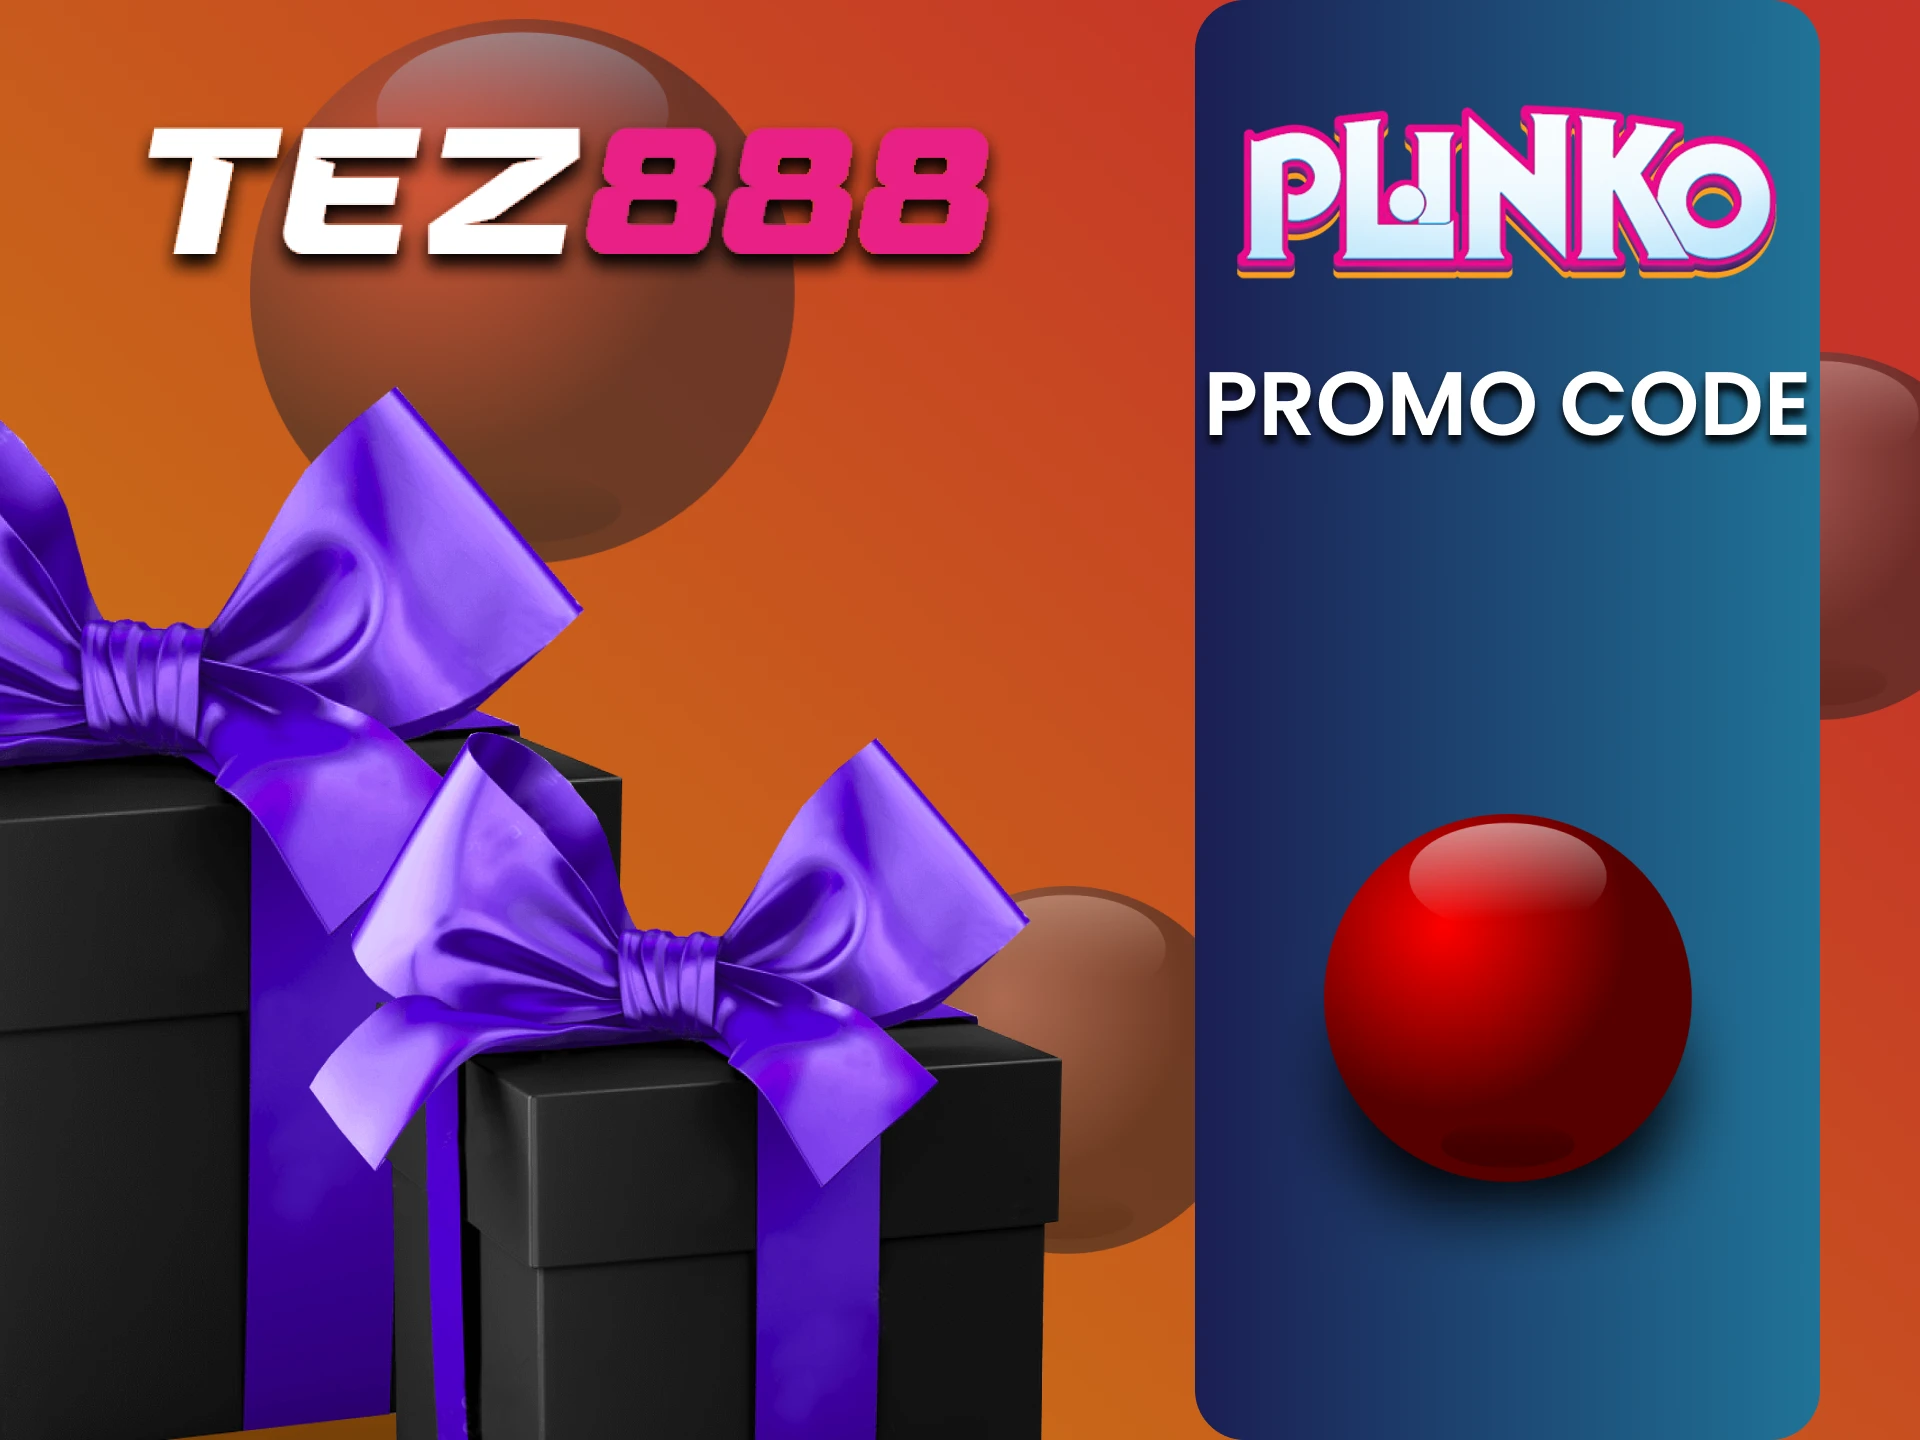 Use promo code from Tez888 to play Plinko.